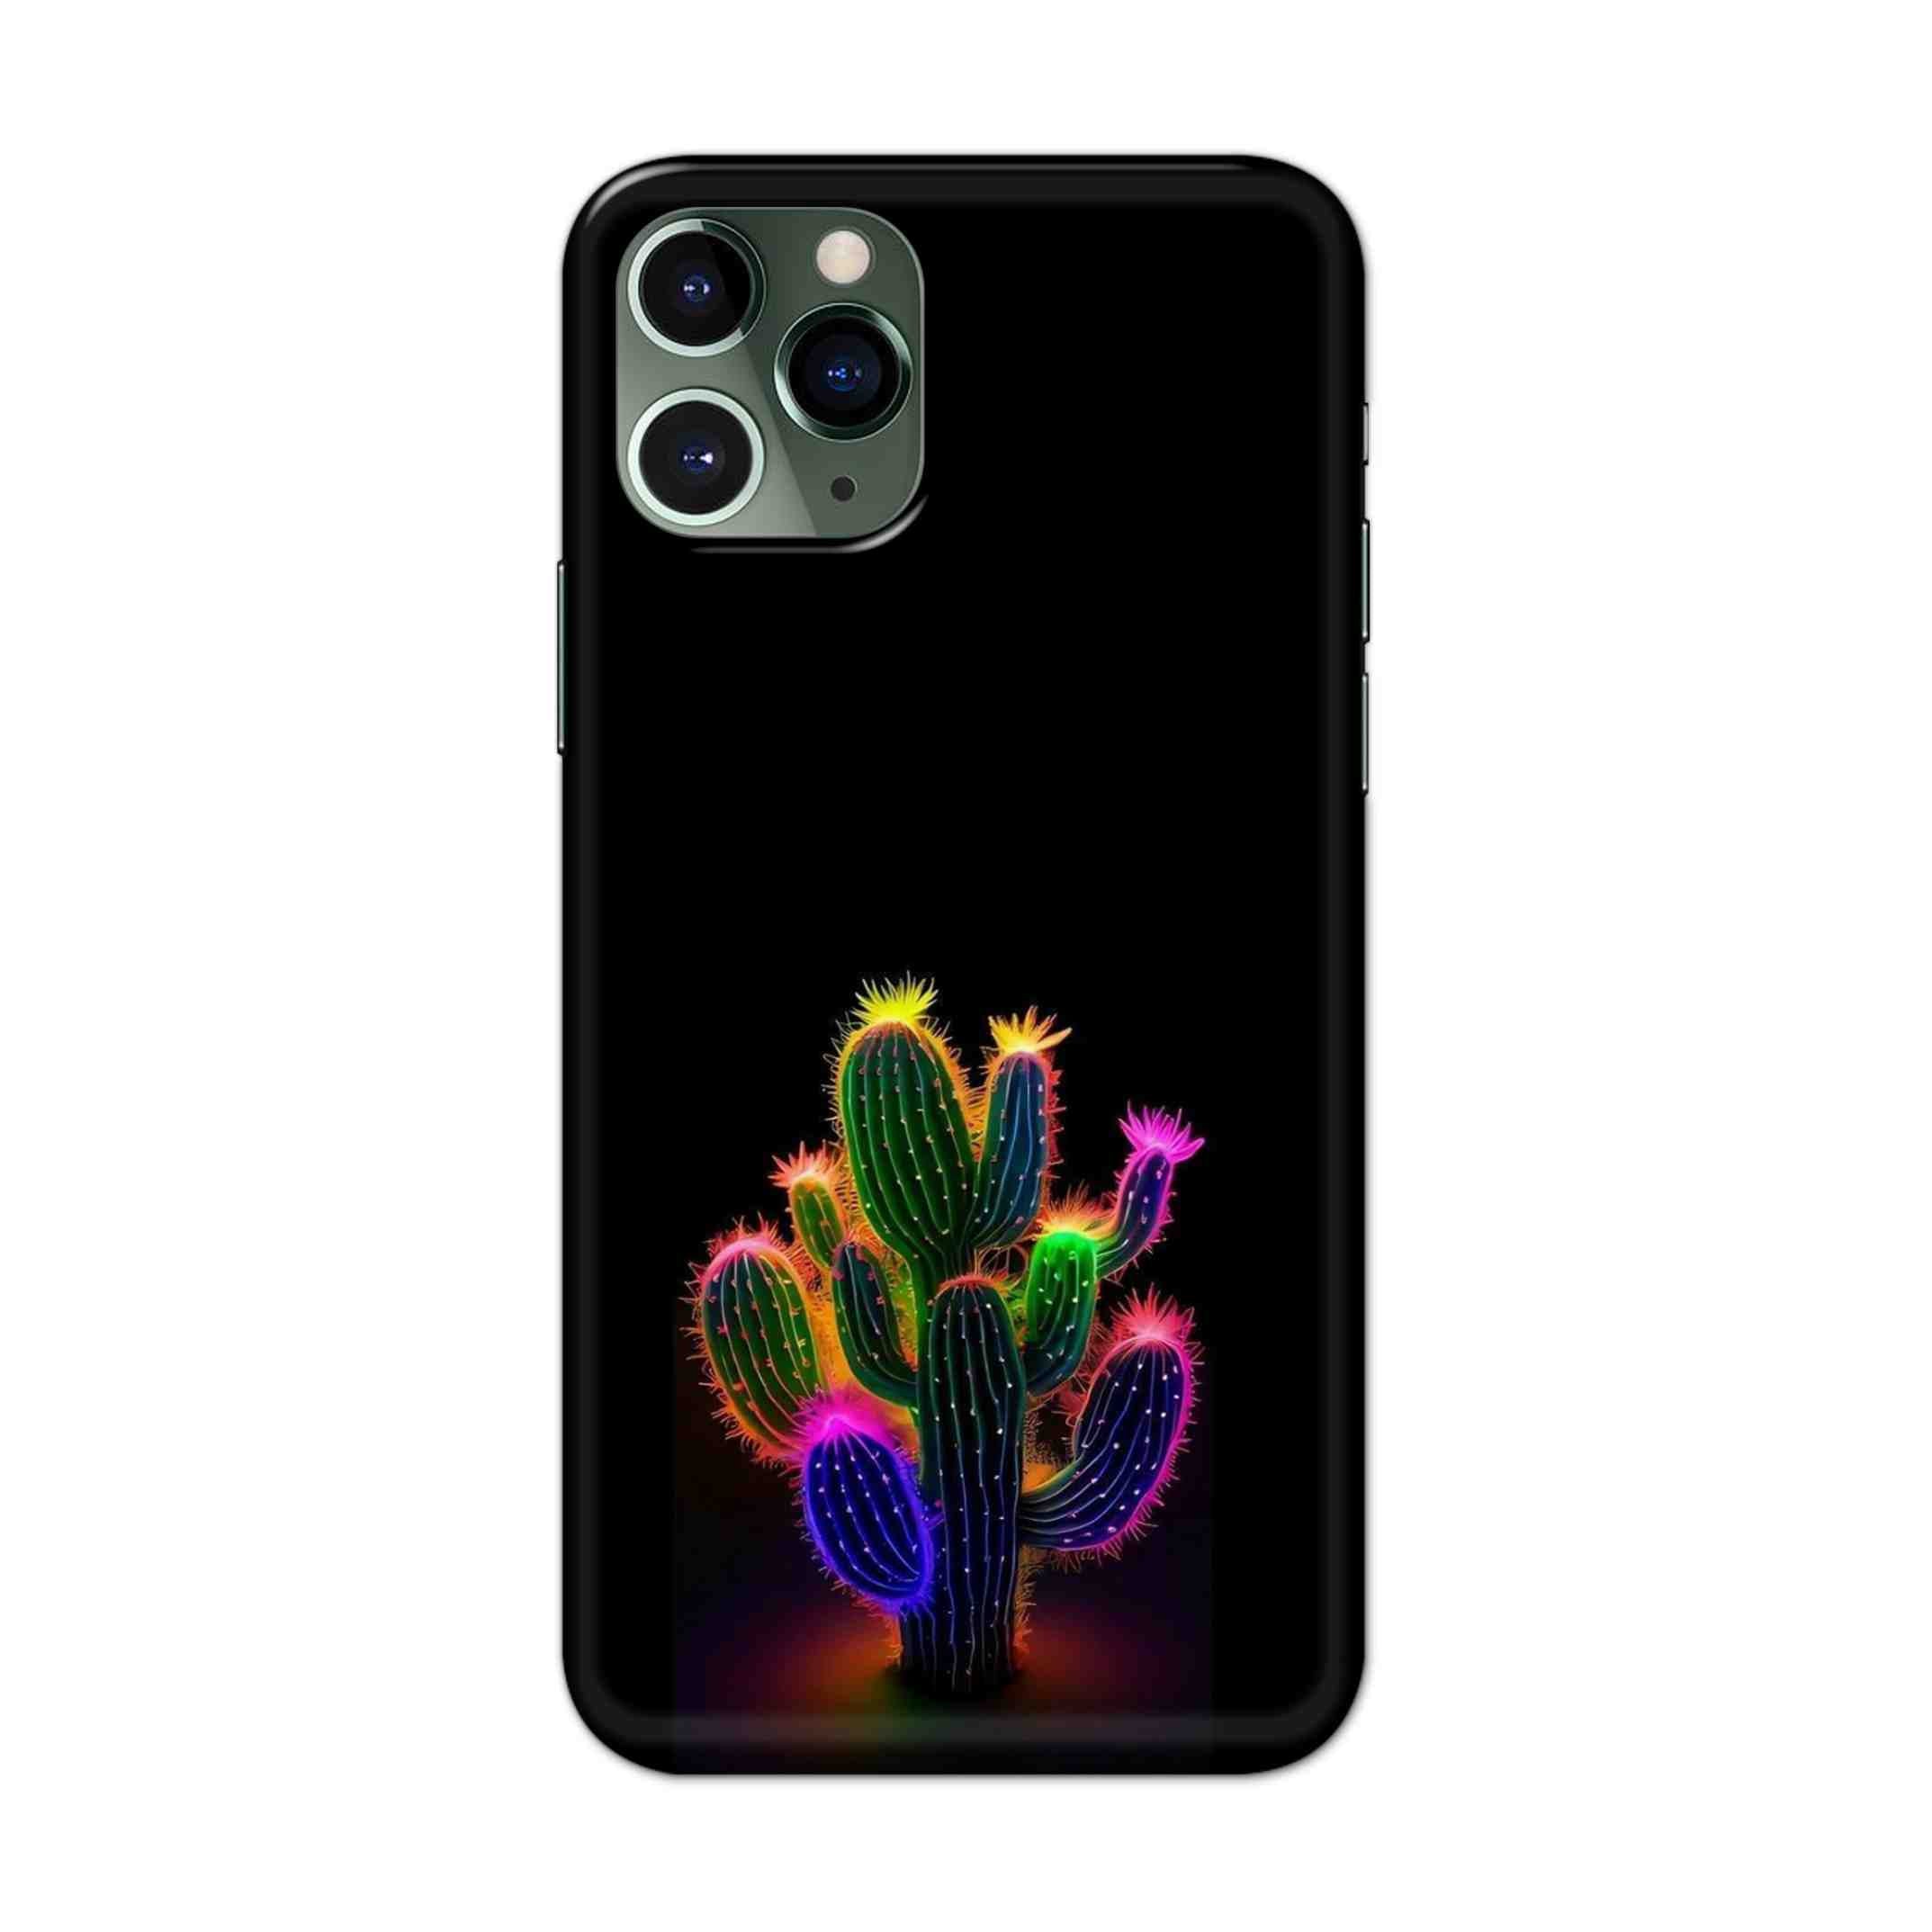 Buy Neon Flower Hard Back Mobile Phone Case/Cover For iPhone 11 Pro Online